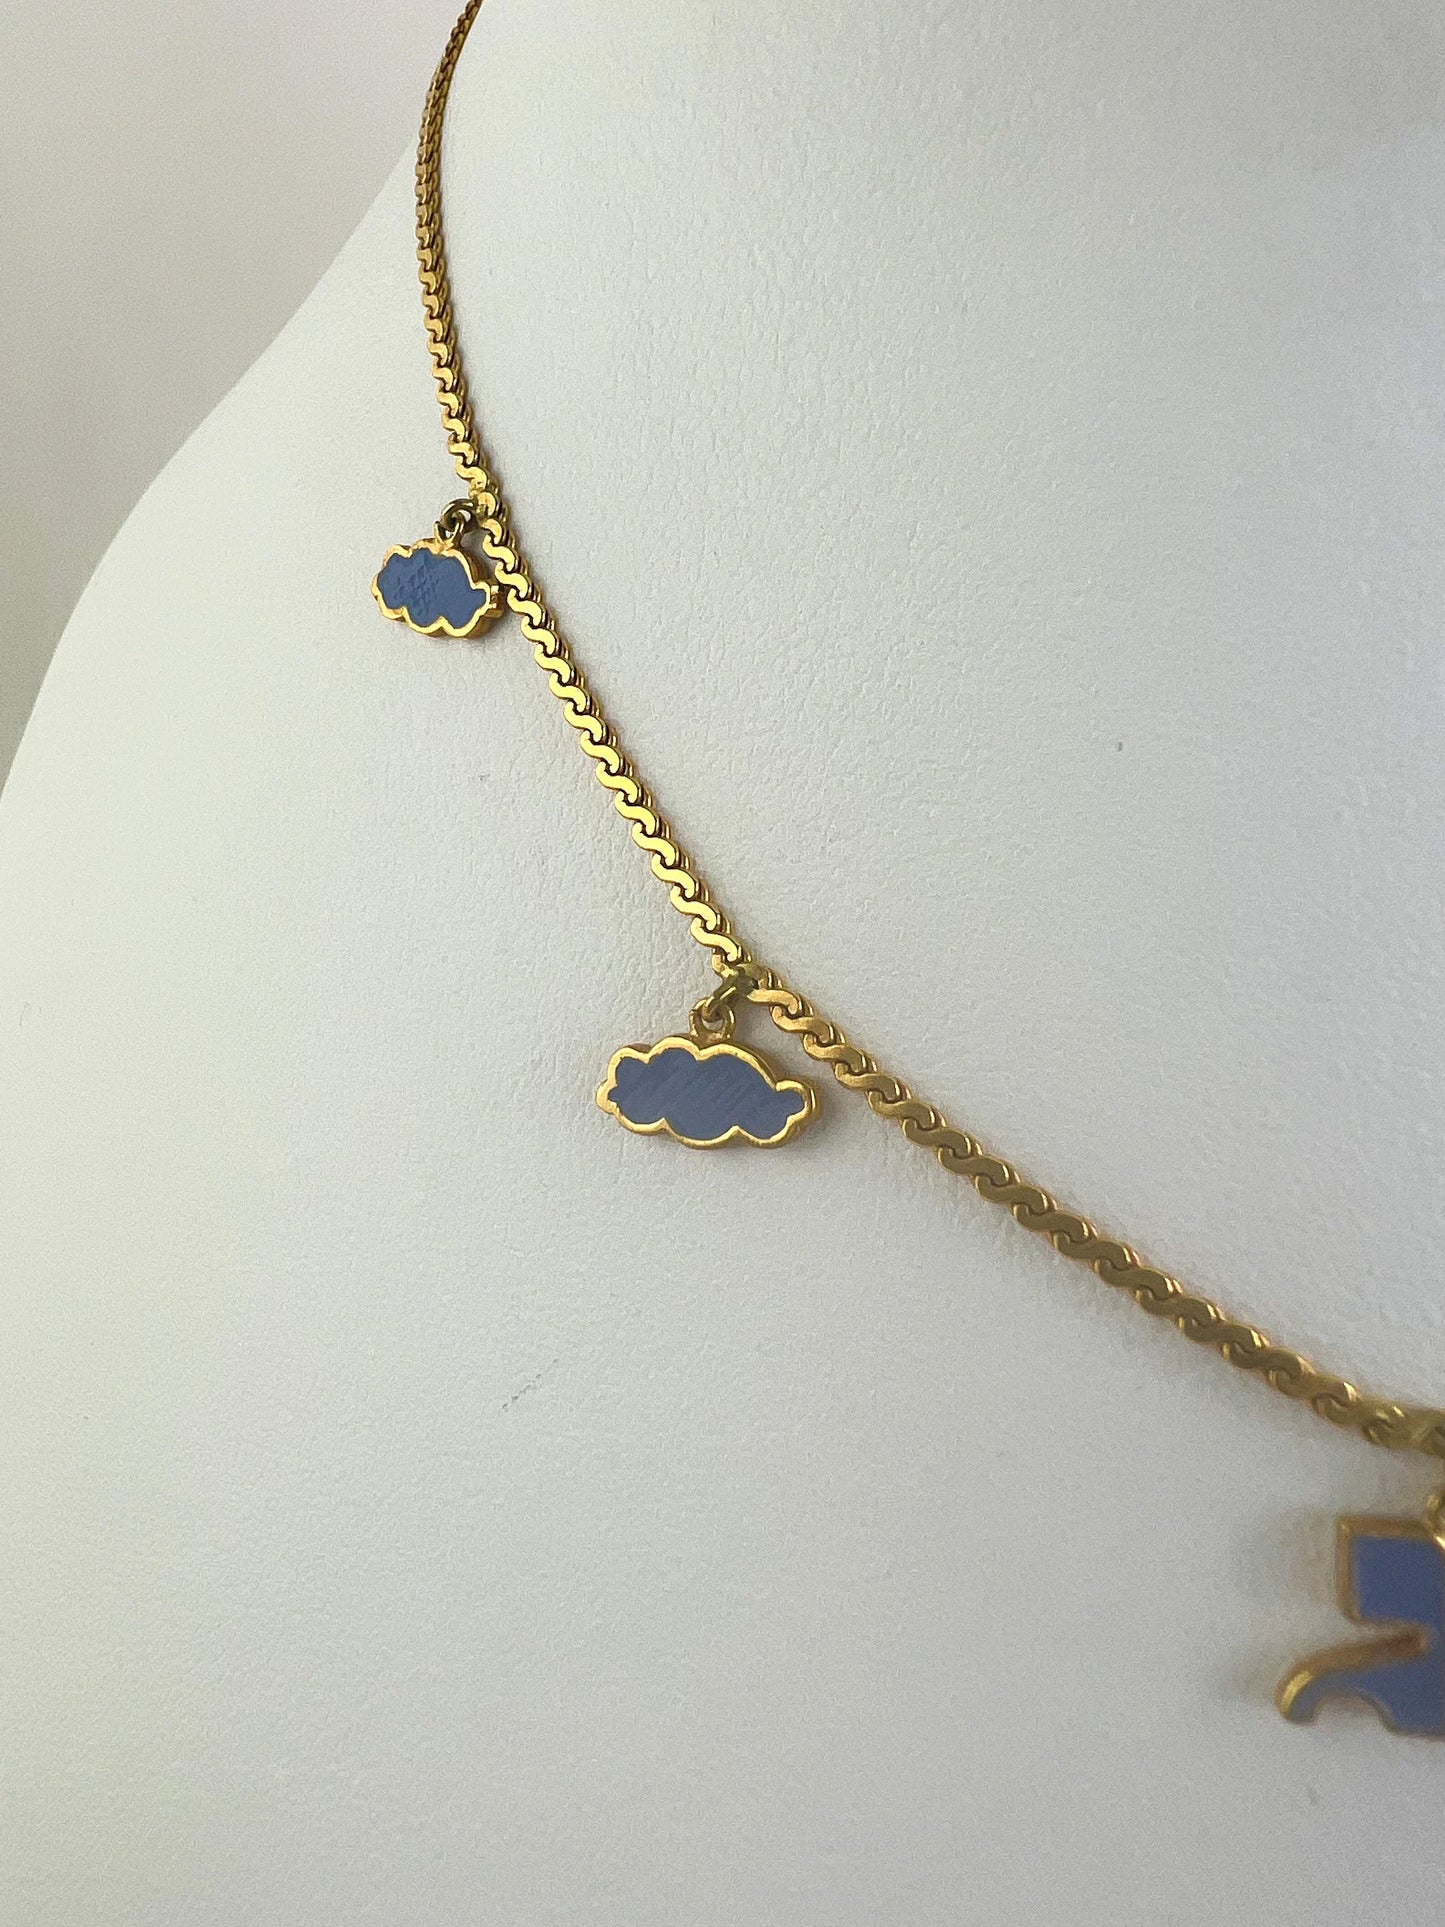 Vintage Courreges, Gold Tiny Logo Necklace, birthday gift for her Dainty & Minimalist Dangling Small Charms Choker Necklace Gold